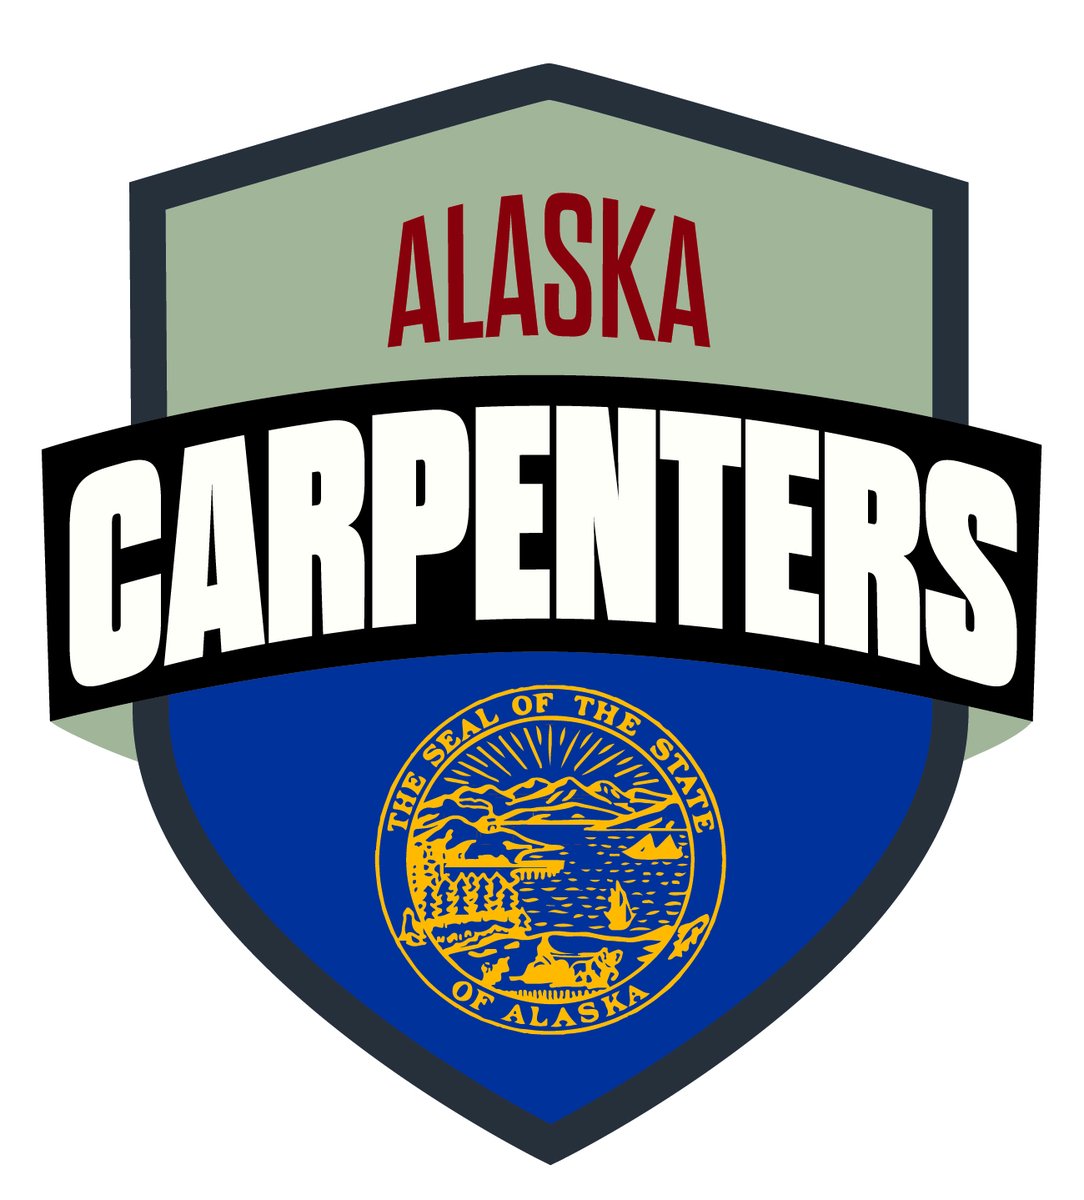 Last but certainly not least, today we reveal the state specific logo for #TheLastFrontier. Welcome Alaska to the #SWMSRCC.12 states strong!

#SWMSCarpenters #UnionCarpenters #JobsWagesBenefits #Brotherhood #UnionStrong #Carpenters #WeBuildAmerica #BorderToBorder #UnionProud